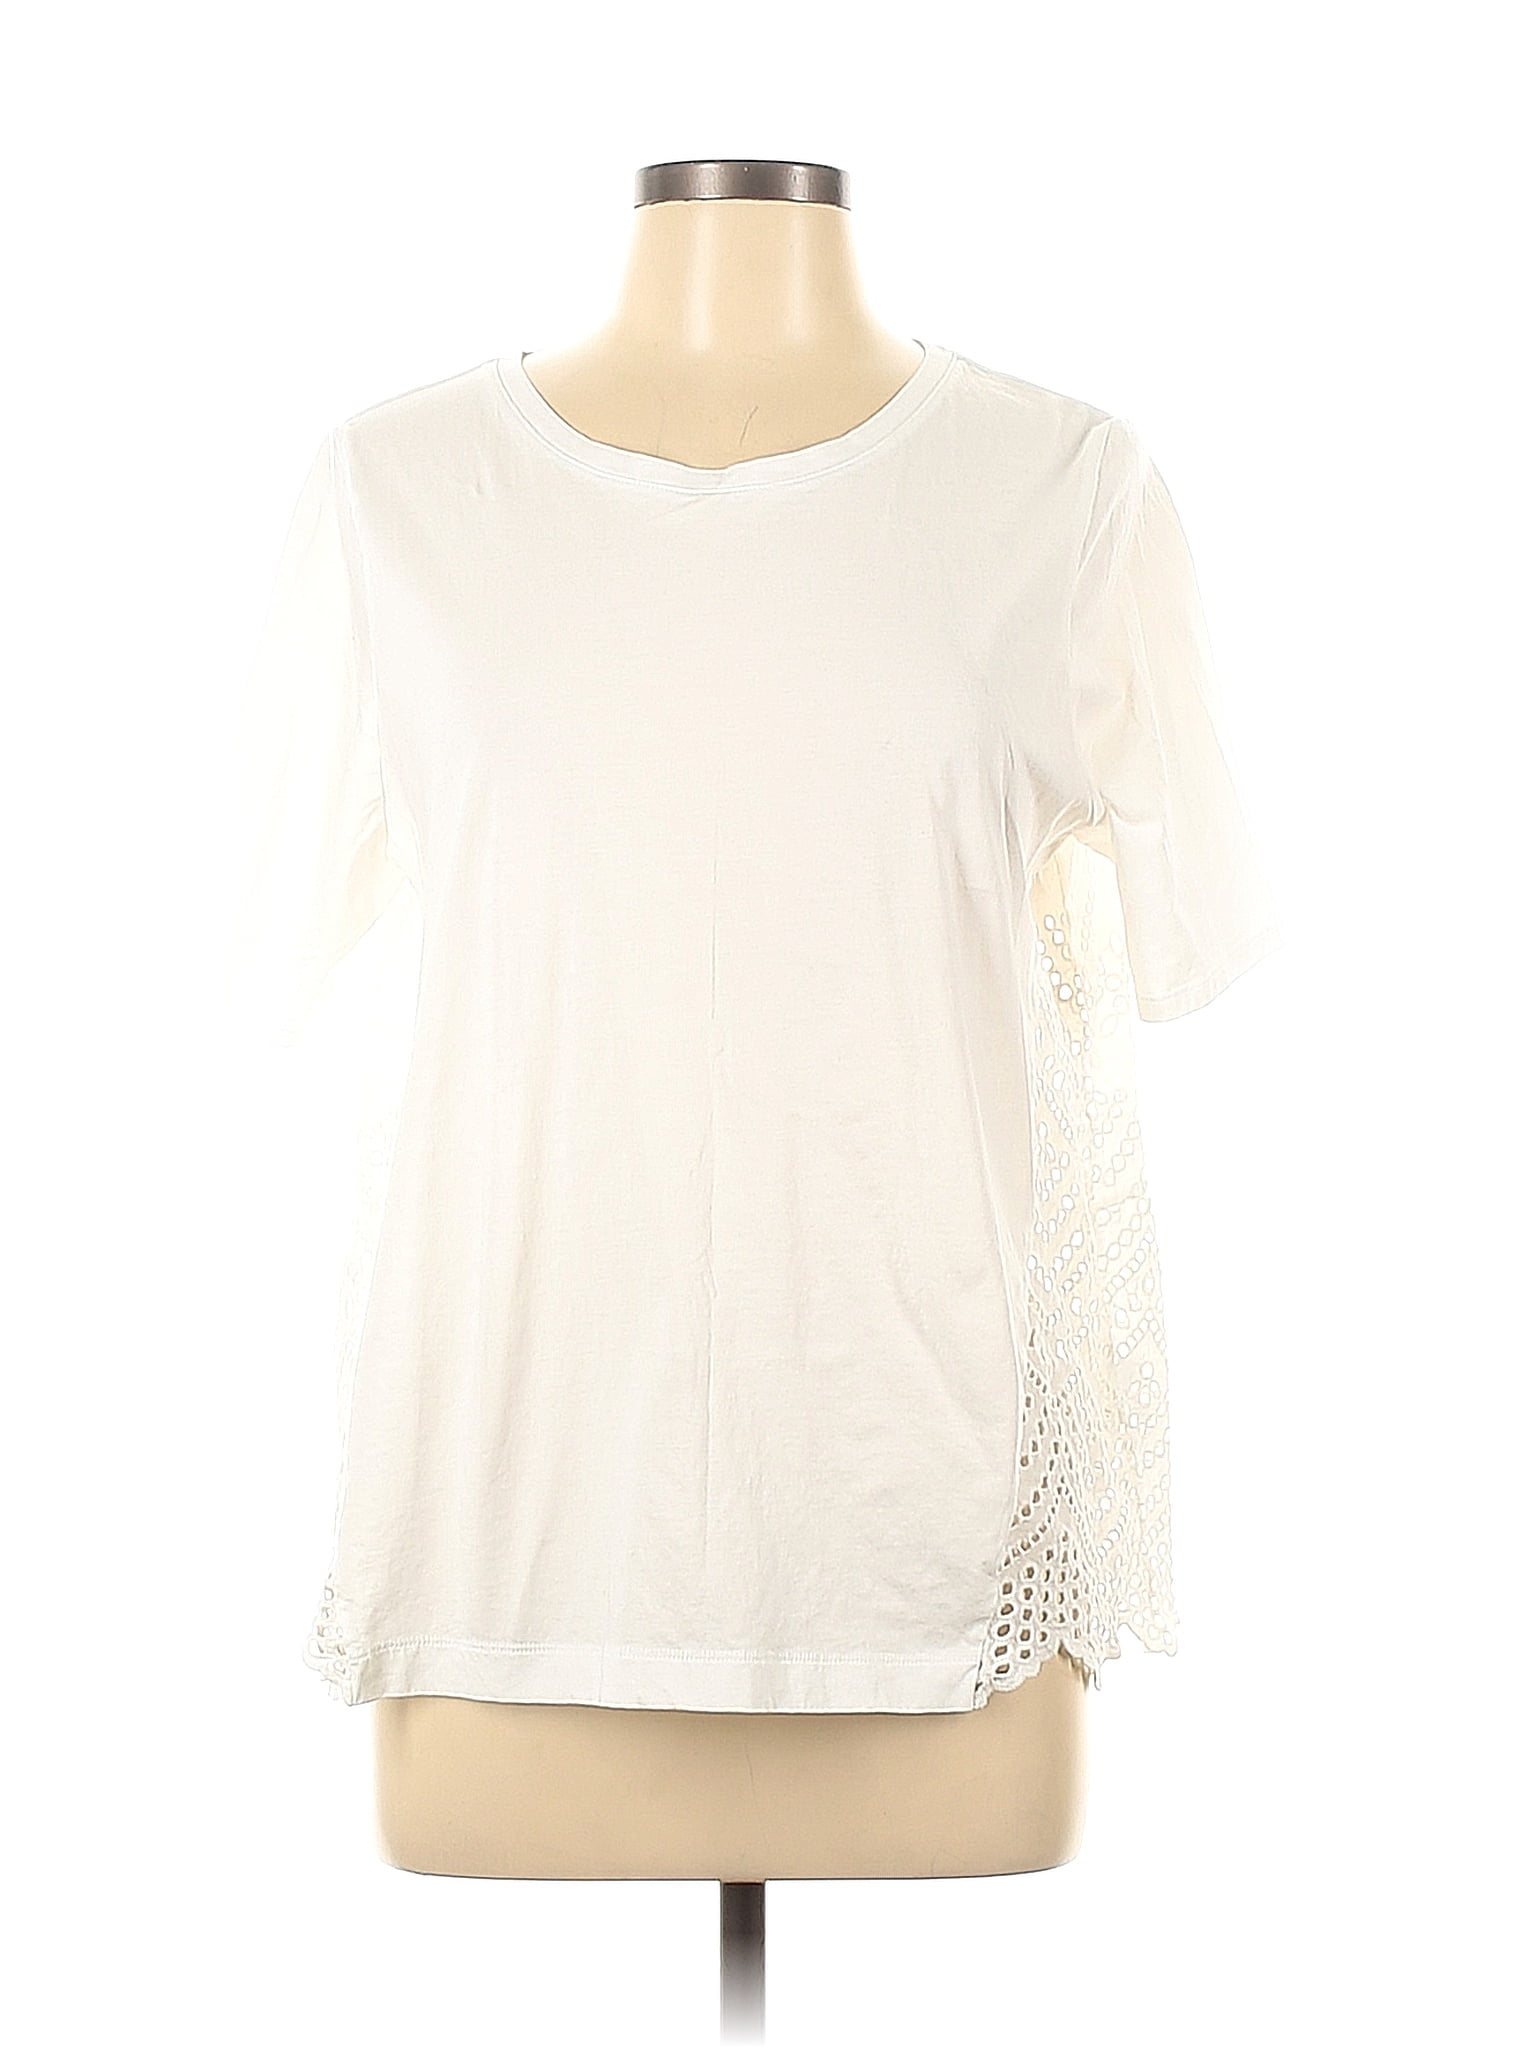 Chico's 100% Cotton White Ivory Short Sleeve Top Size Lg (2) - 75% off ...